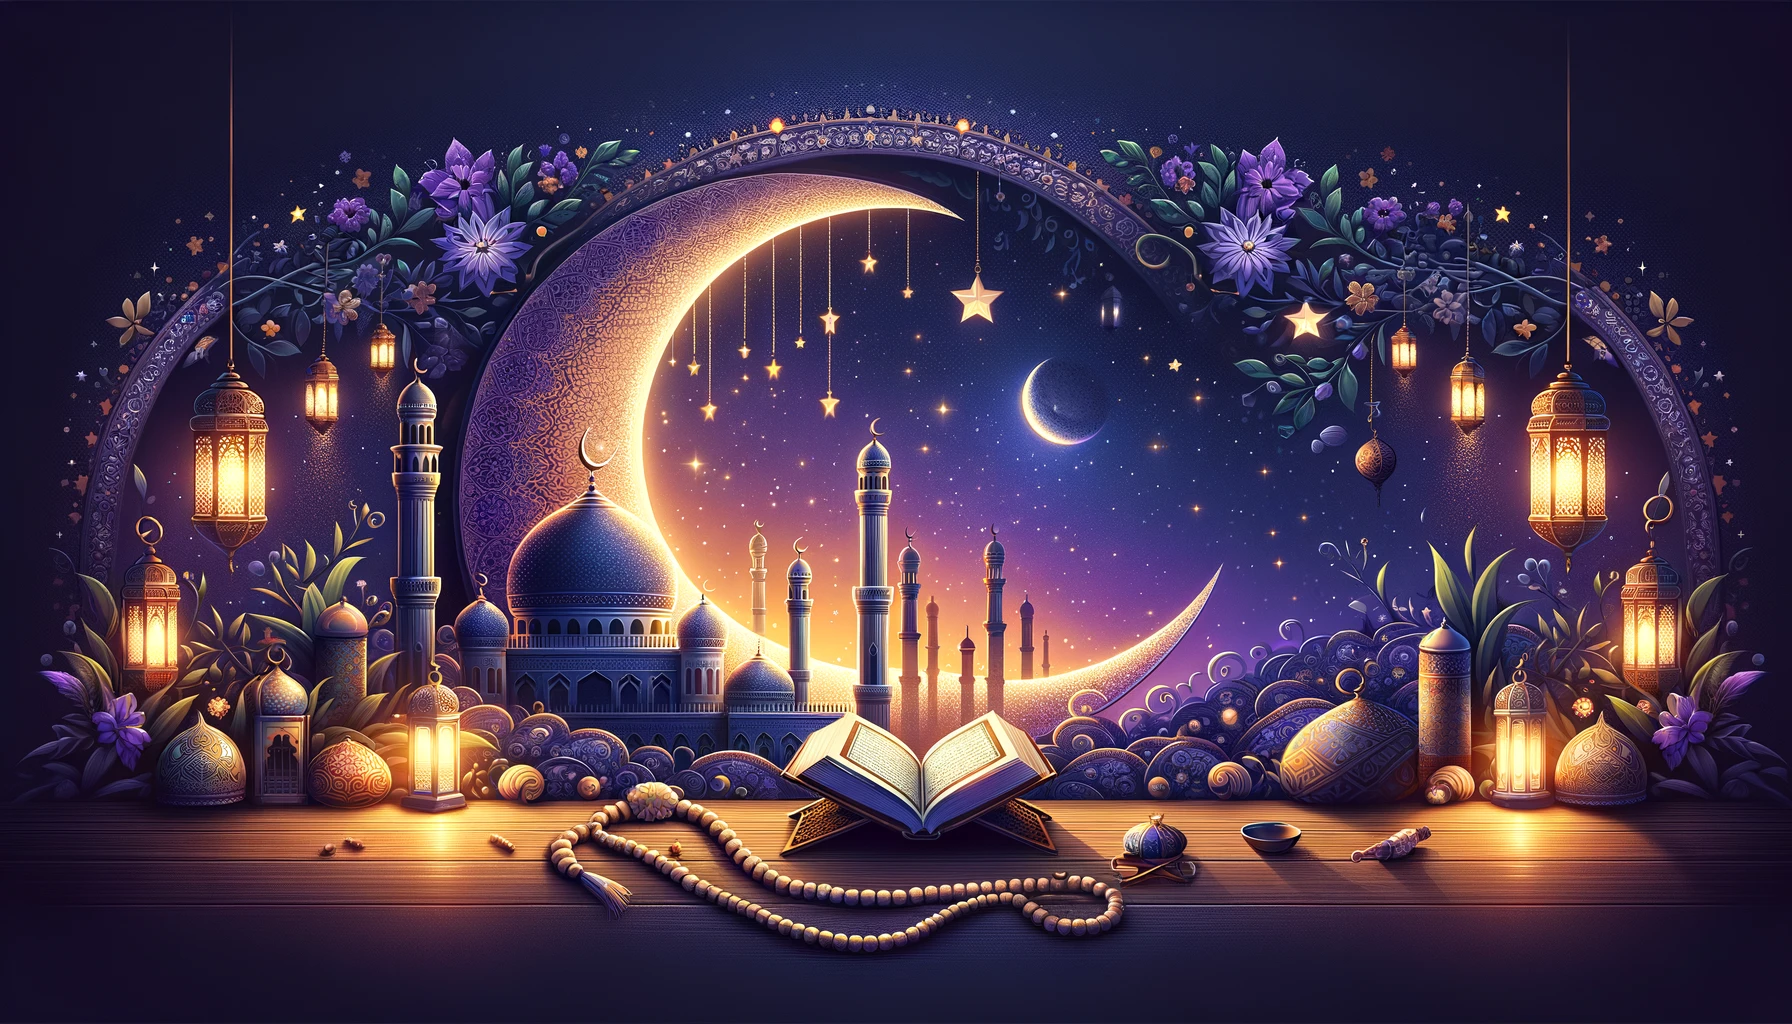 Inspirational Ramadan banner featuring a crescent moon, illuminated mosque, open Quran, and prayer beads against a night-to-dawn background with lanterns and stars.